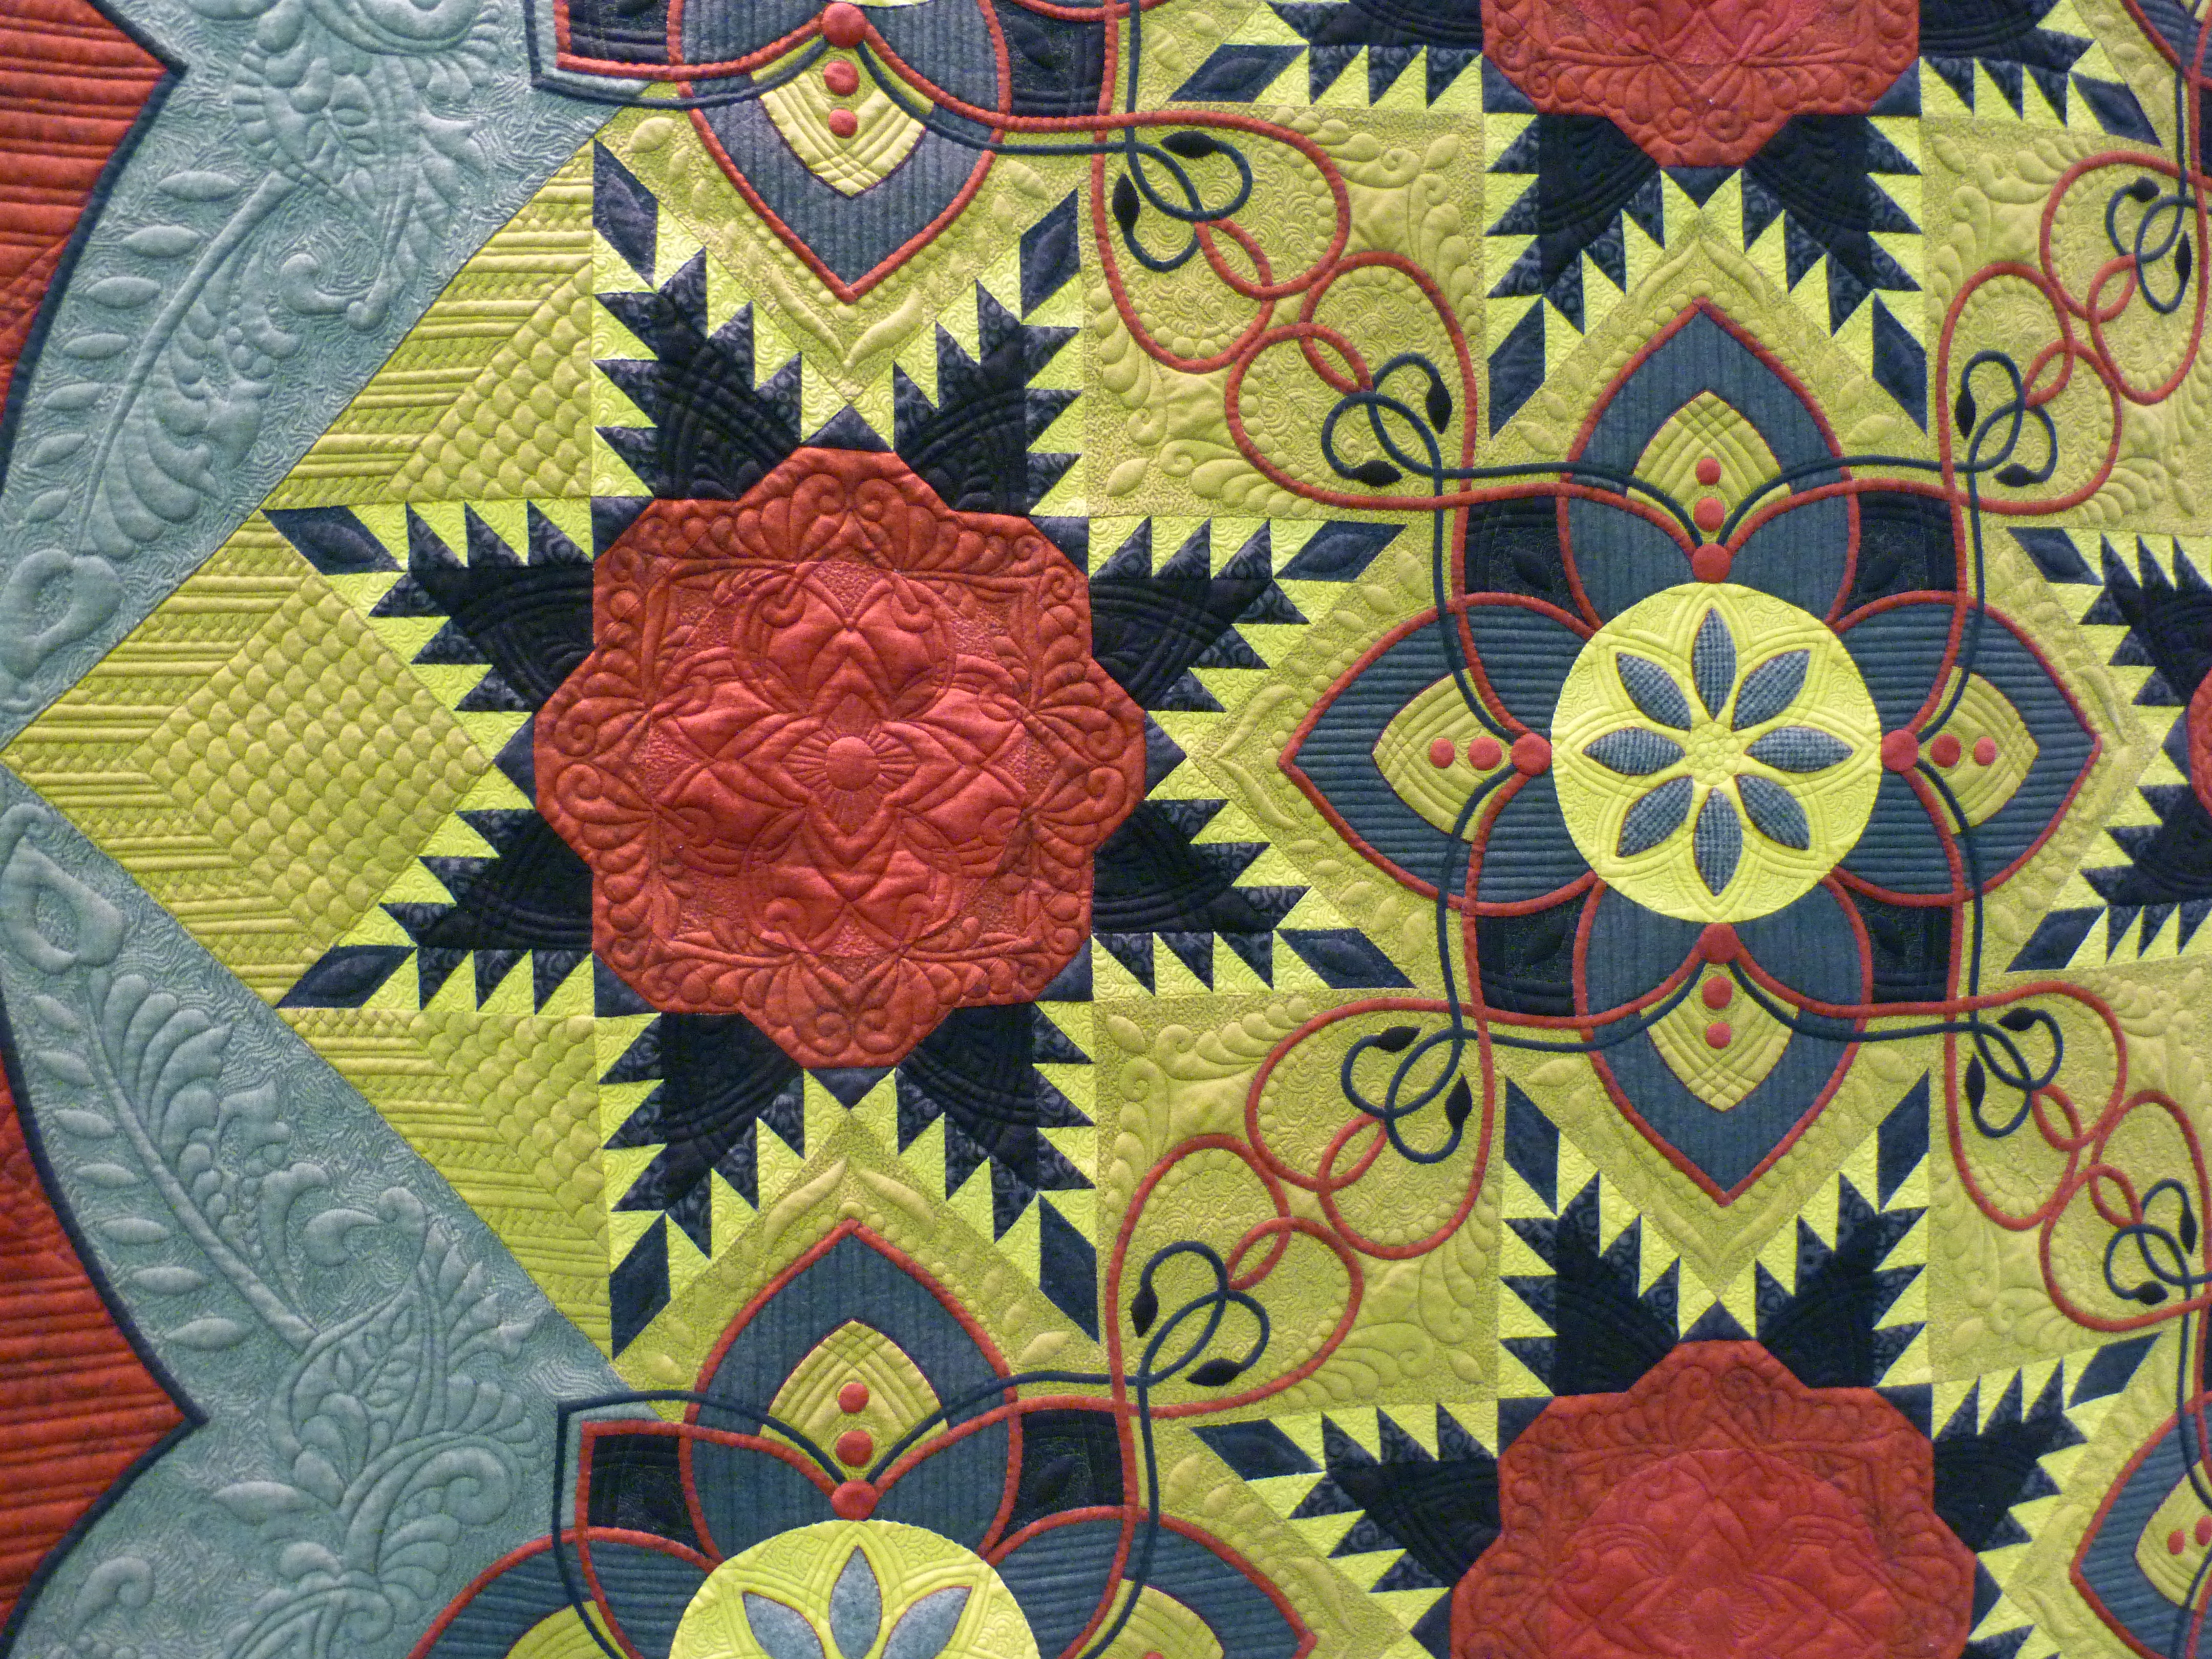 AQS QuiltWeek in Paducah III Feathered Star Quilts Dragonfly Quilts